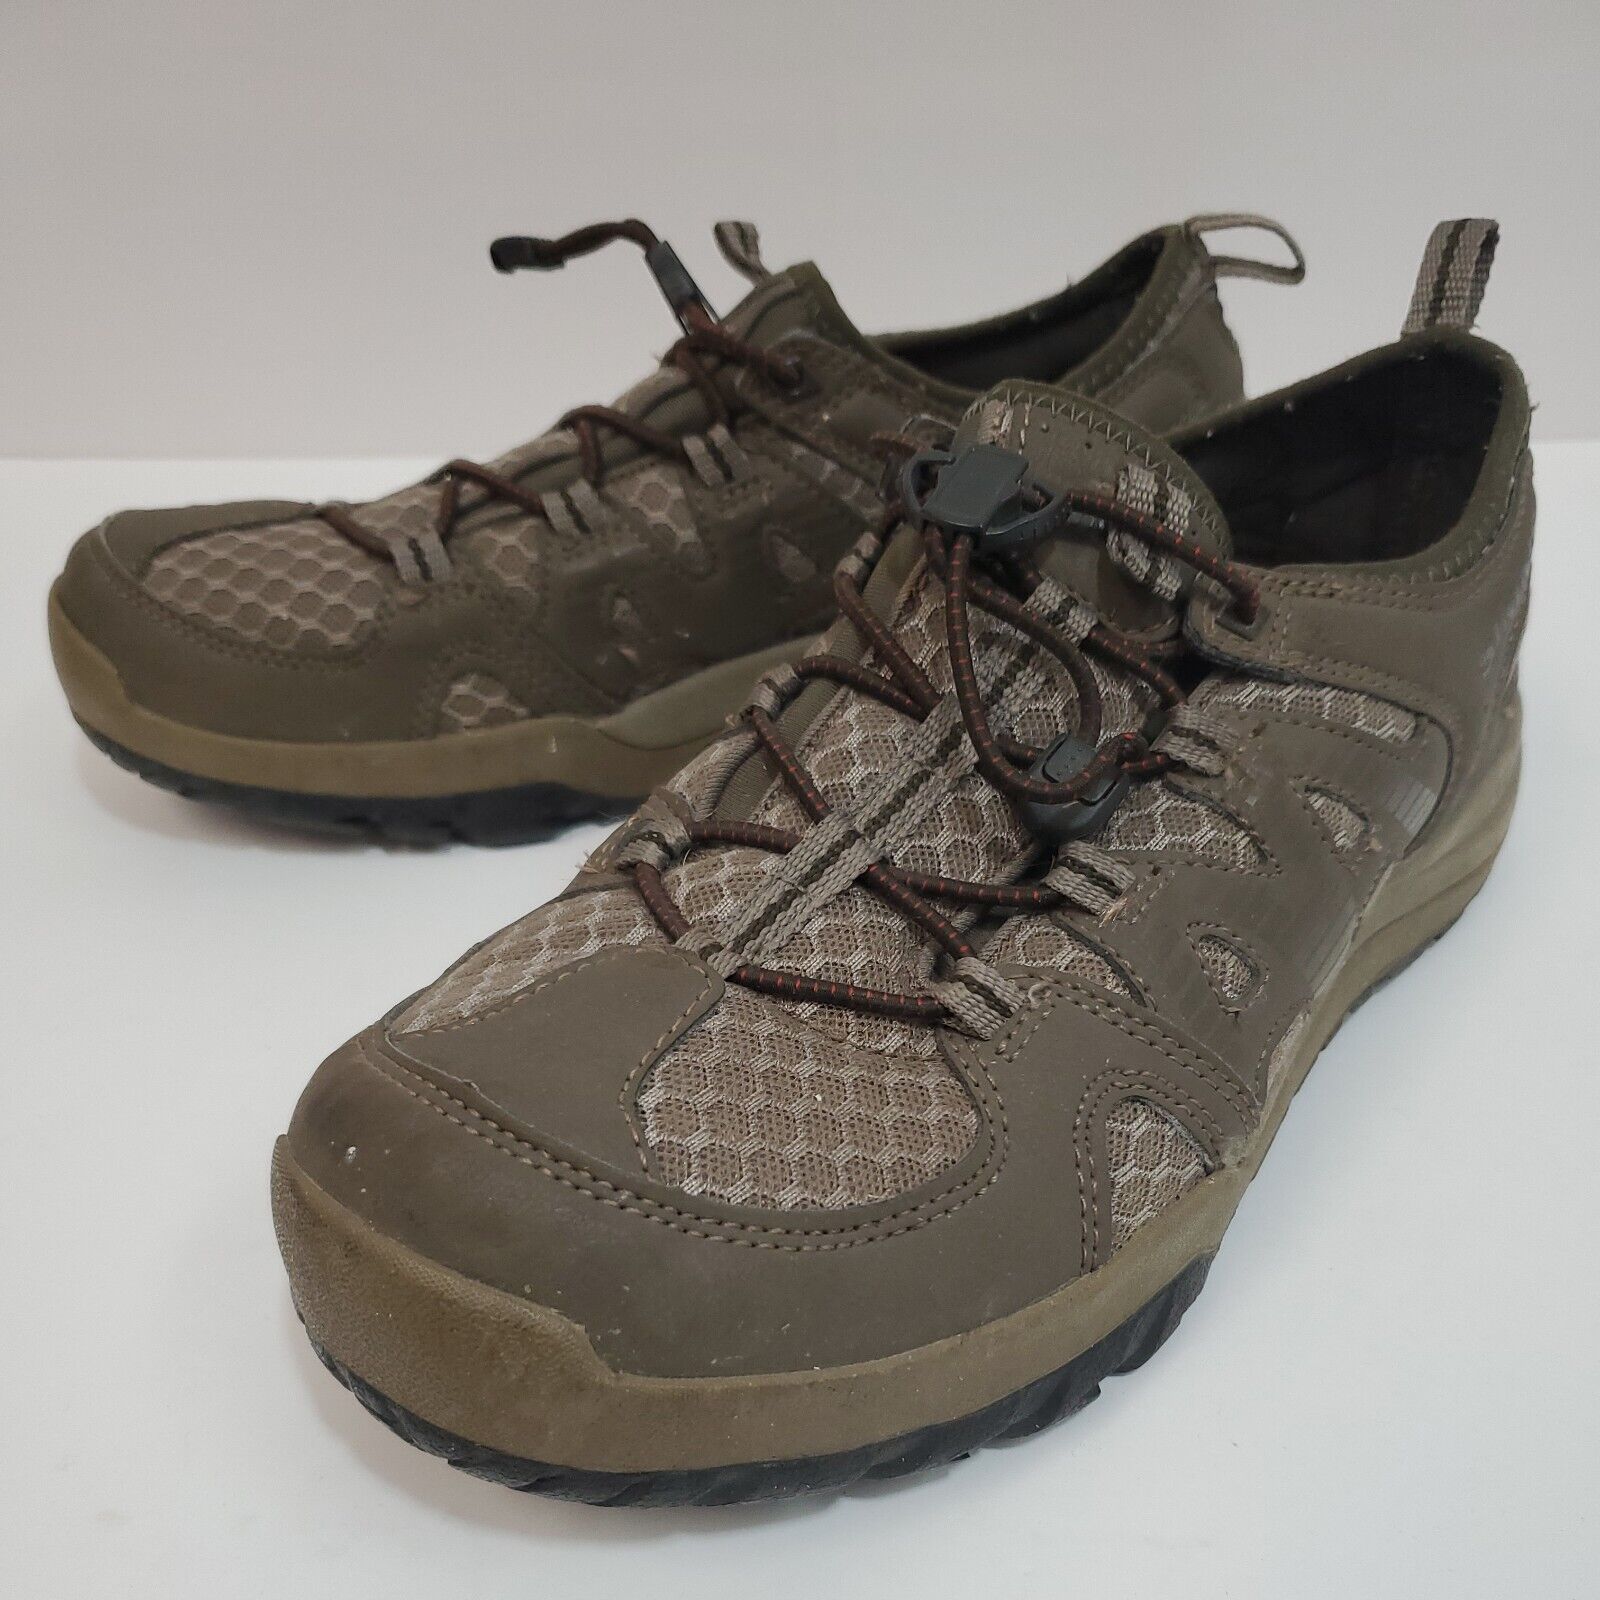 Simms Men's Size 9.5 Riprap Fishing Wading Shoes Bungee Cord Right Angle Footbed